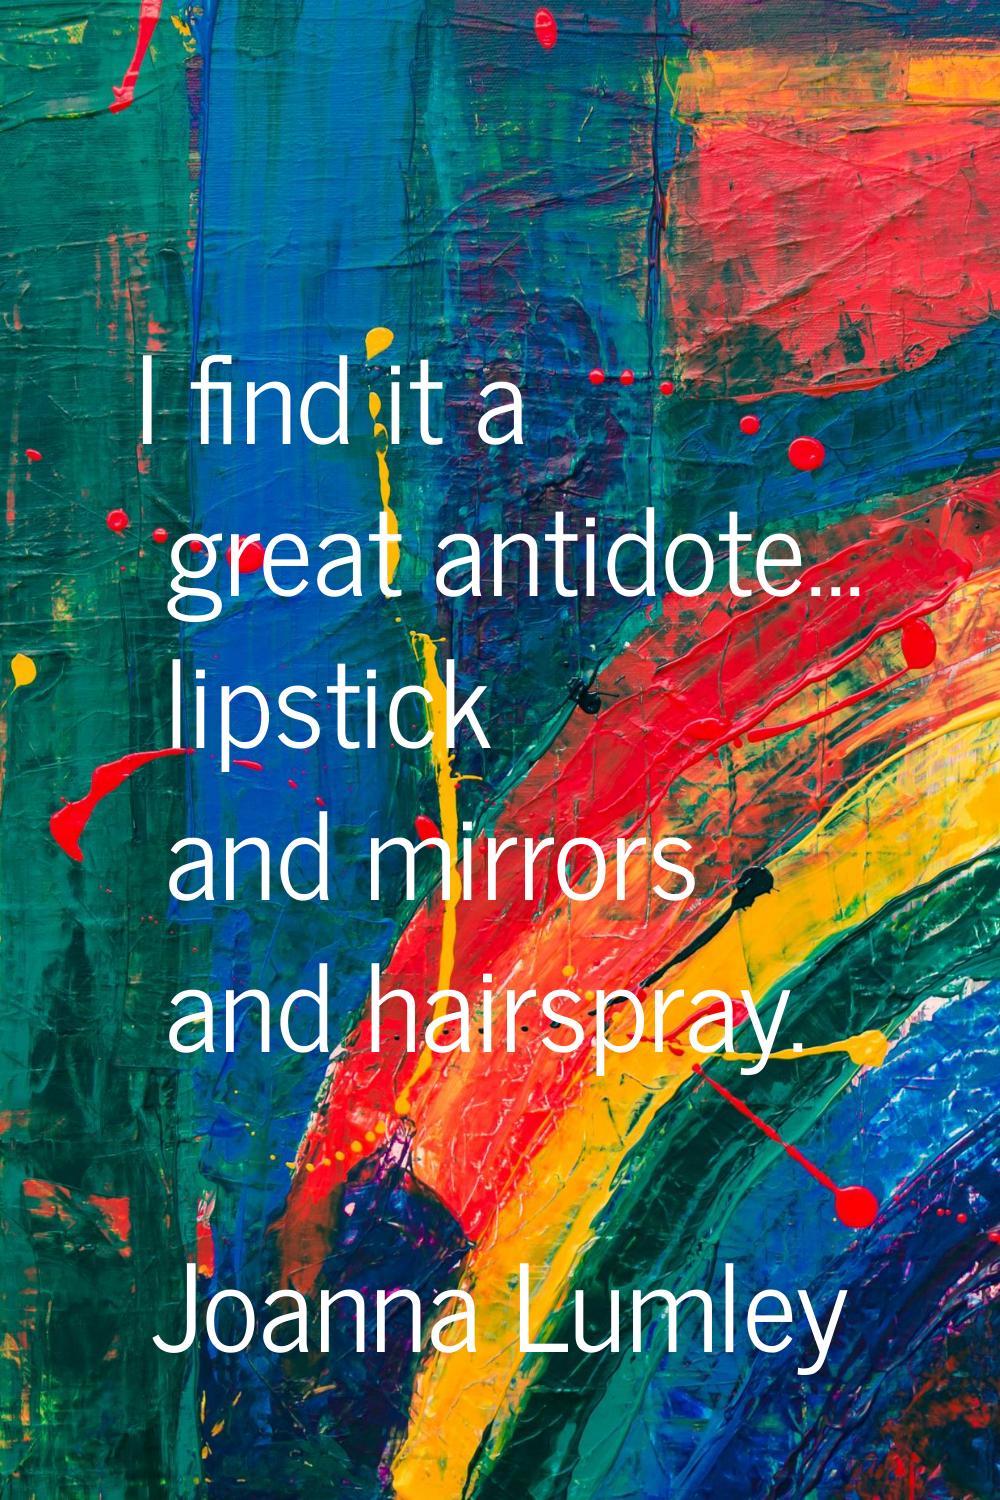 I find it a great antidote... lipstick and mirrors and hairspray.